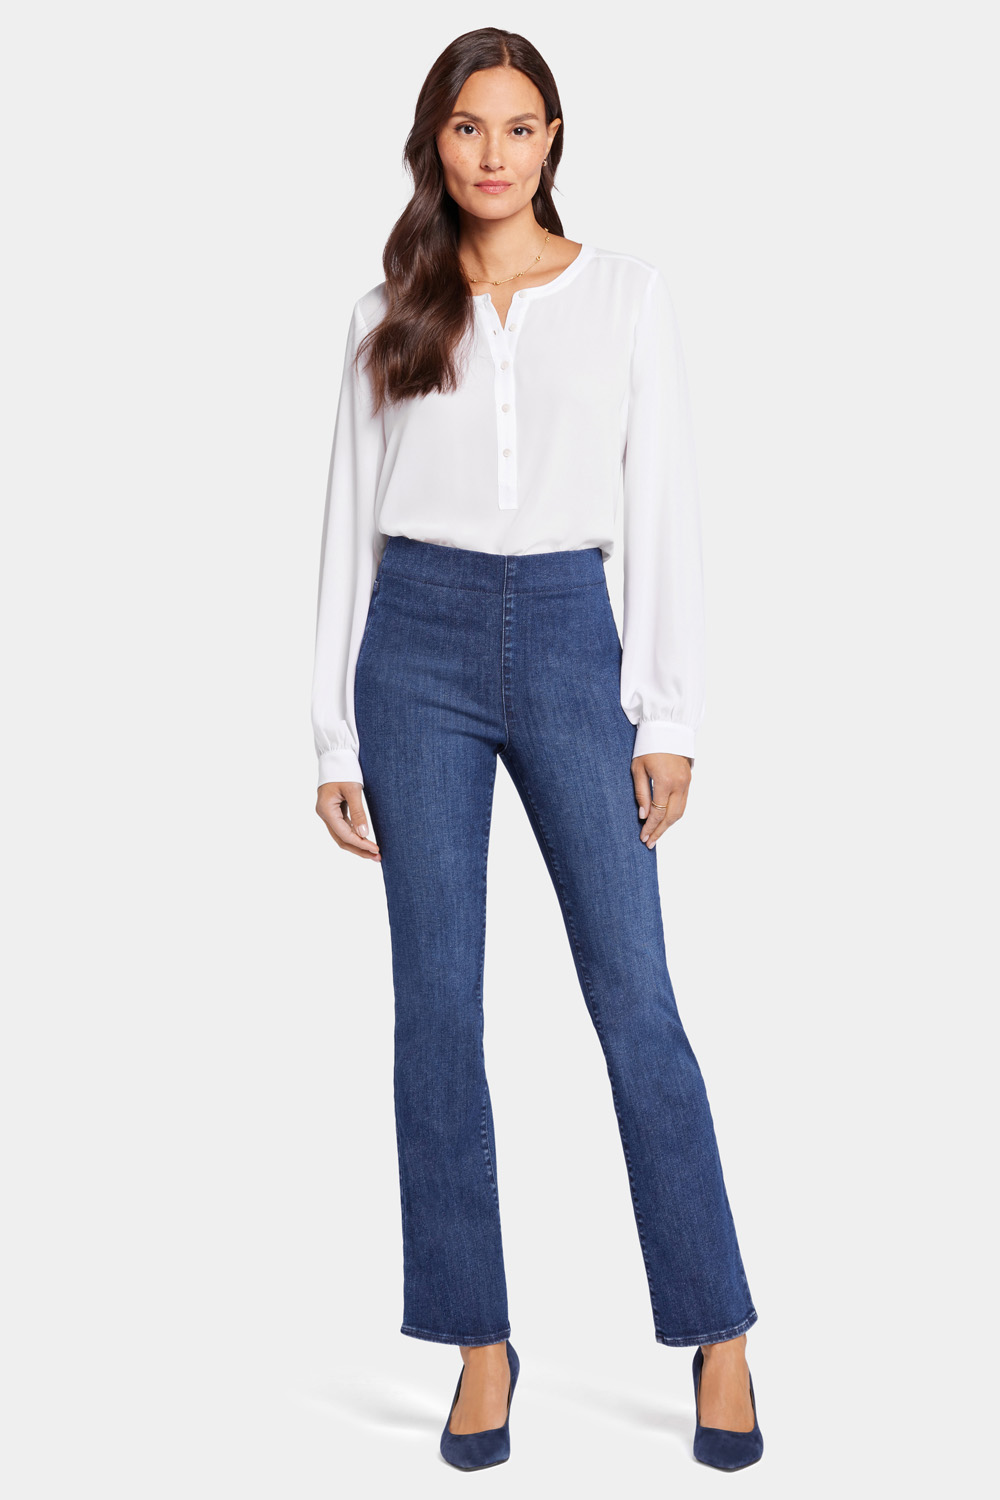 Women's Petite Slim Jeans - High-Rise, Ankled & Flared | NYDJ Apparel